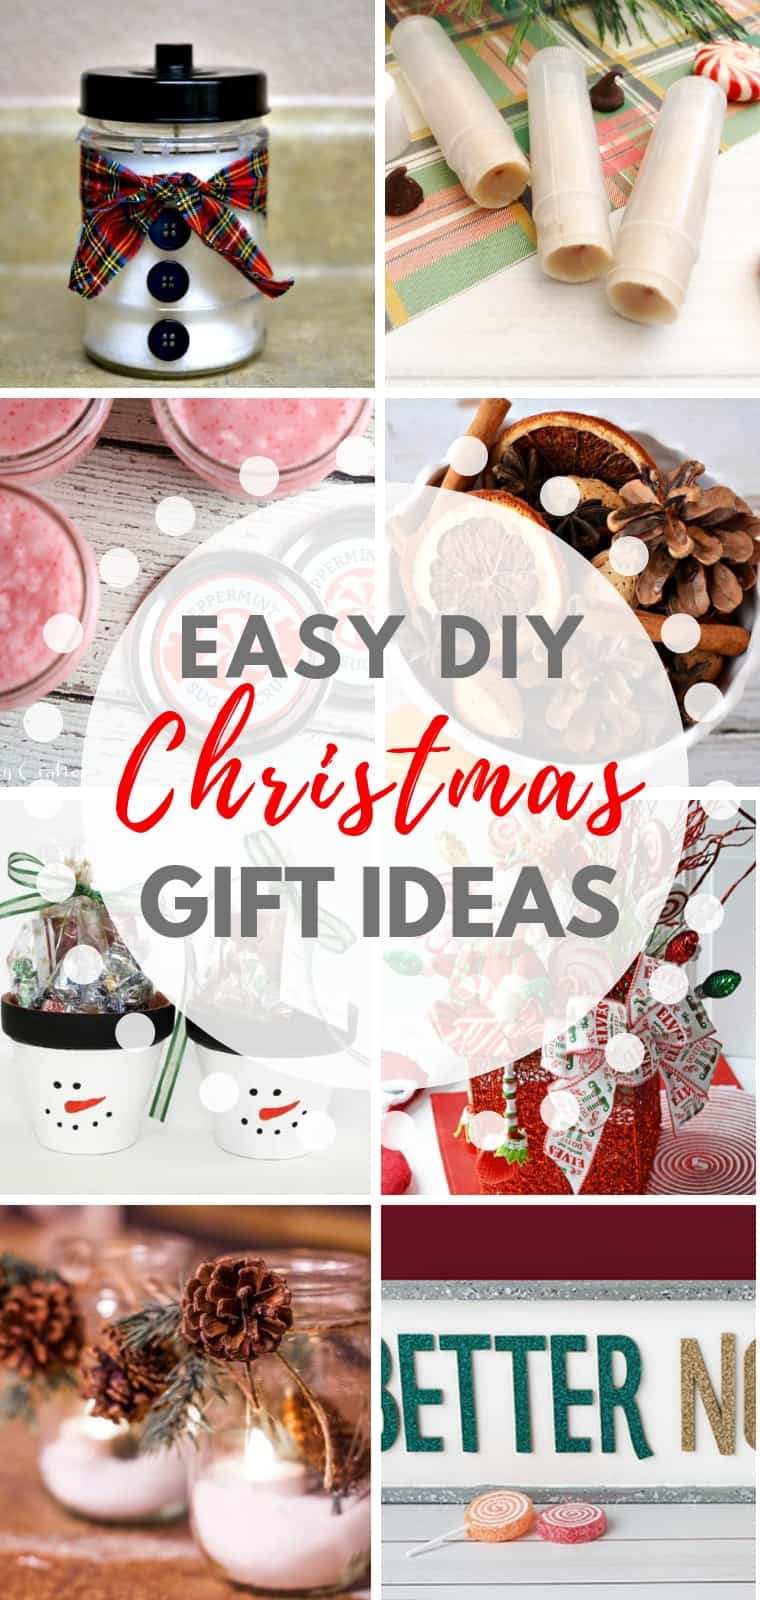 DIY Christmas Gifts People Will Love to Get  Smart Mom at Home